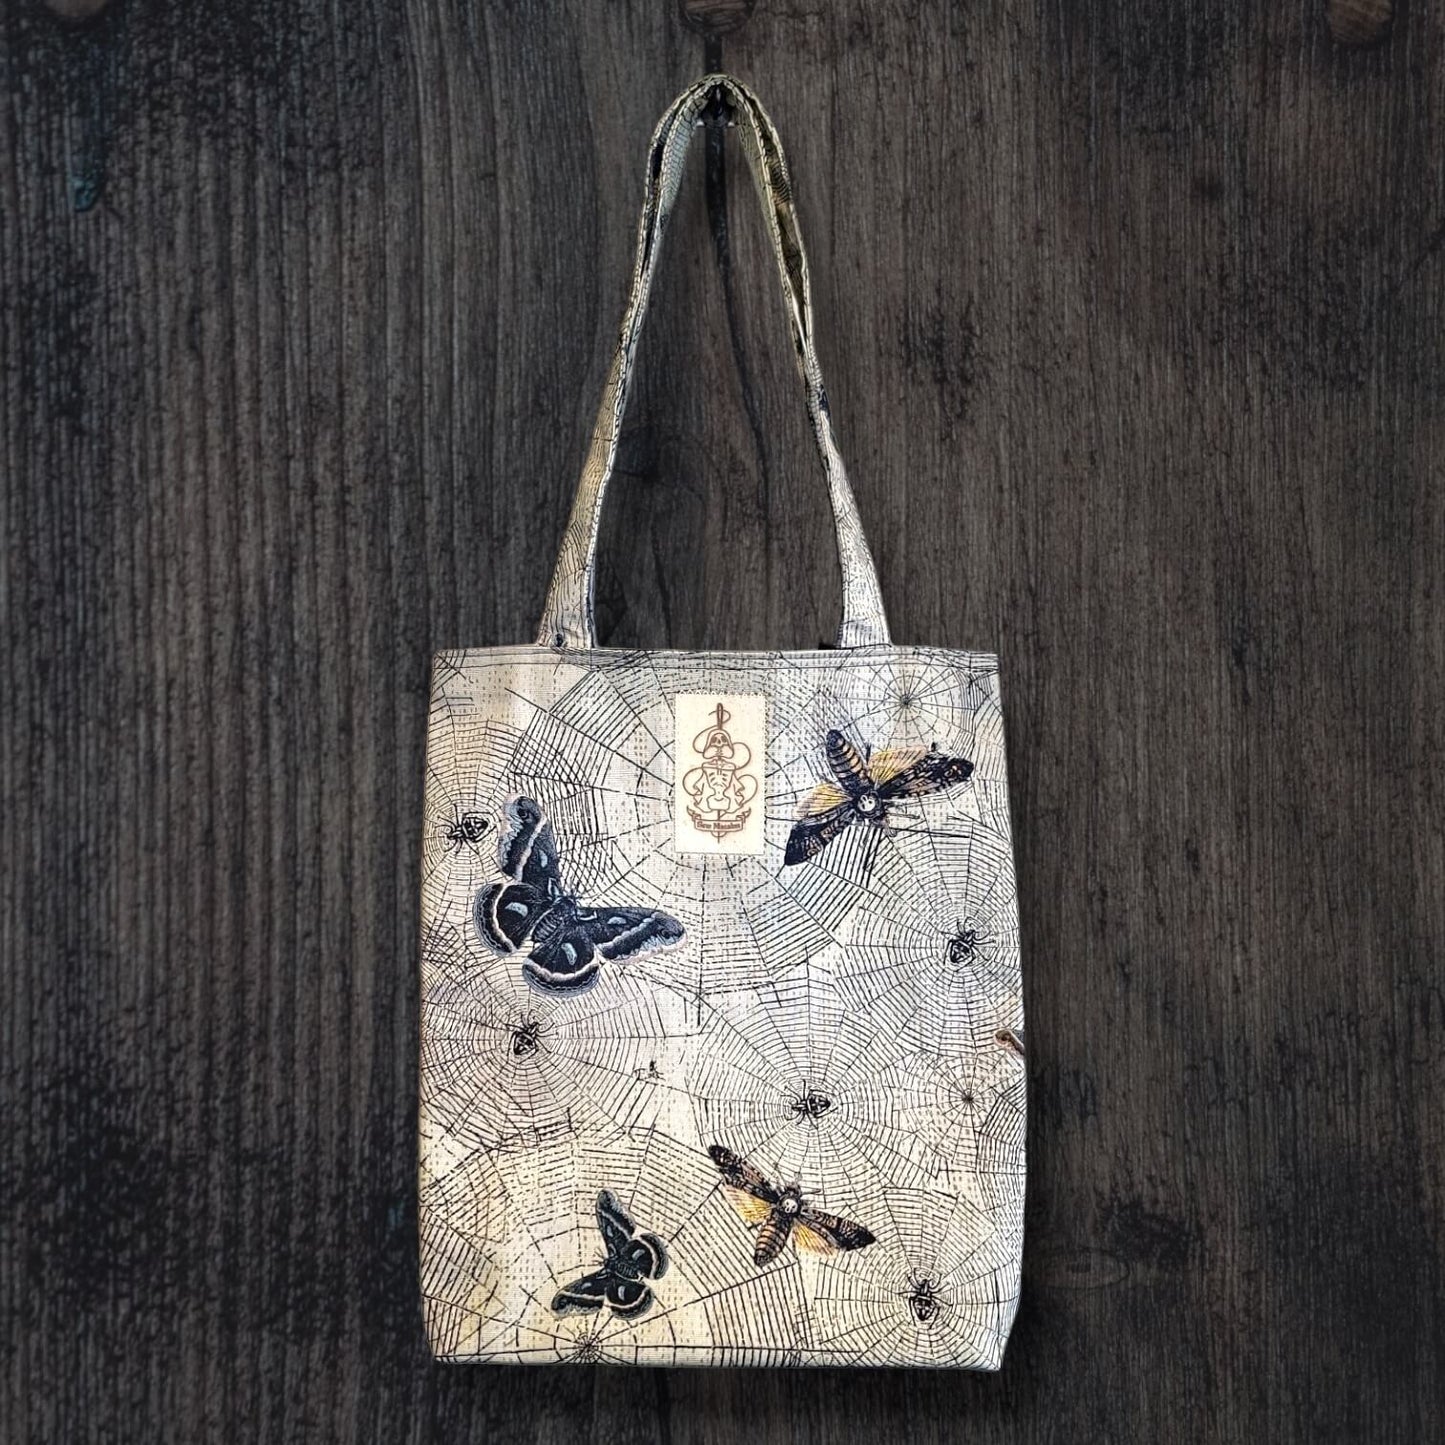 our boxed tote bags featuring our The Garden pattern.